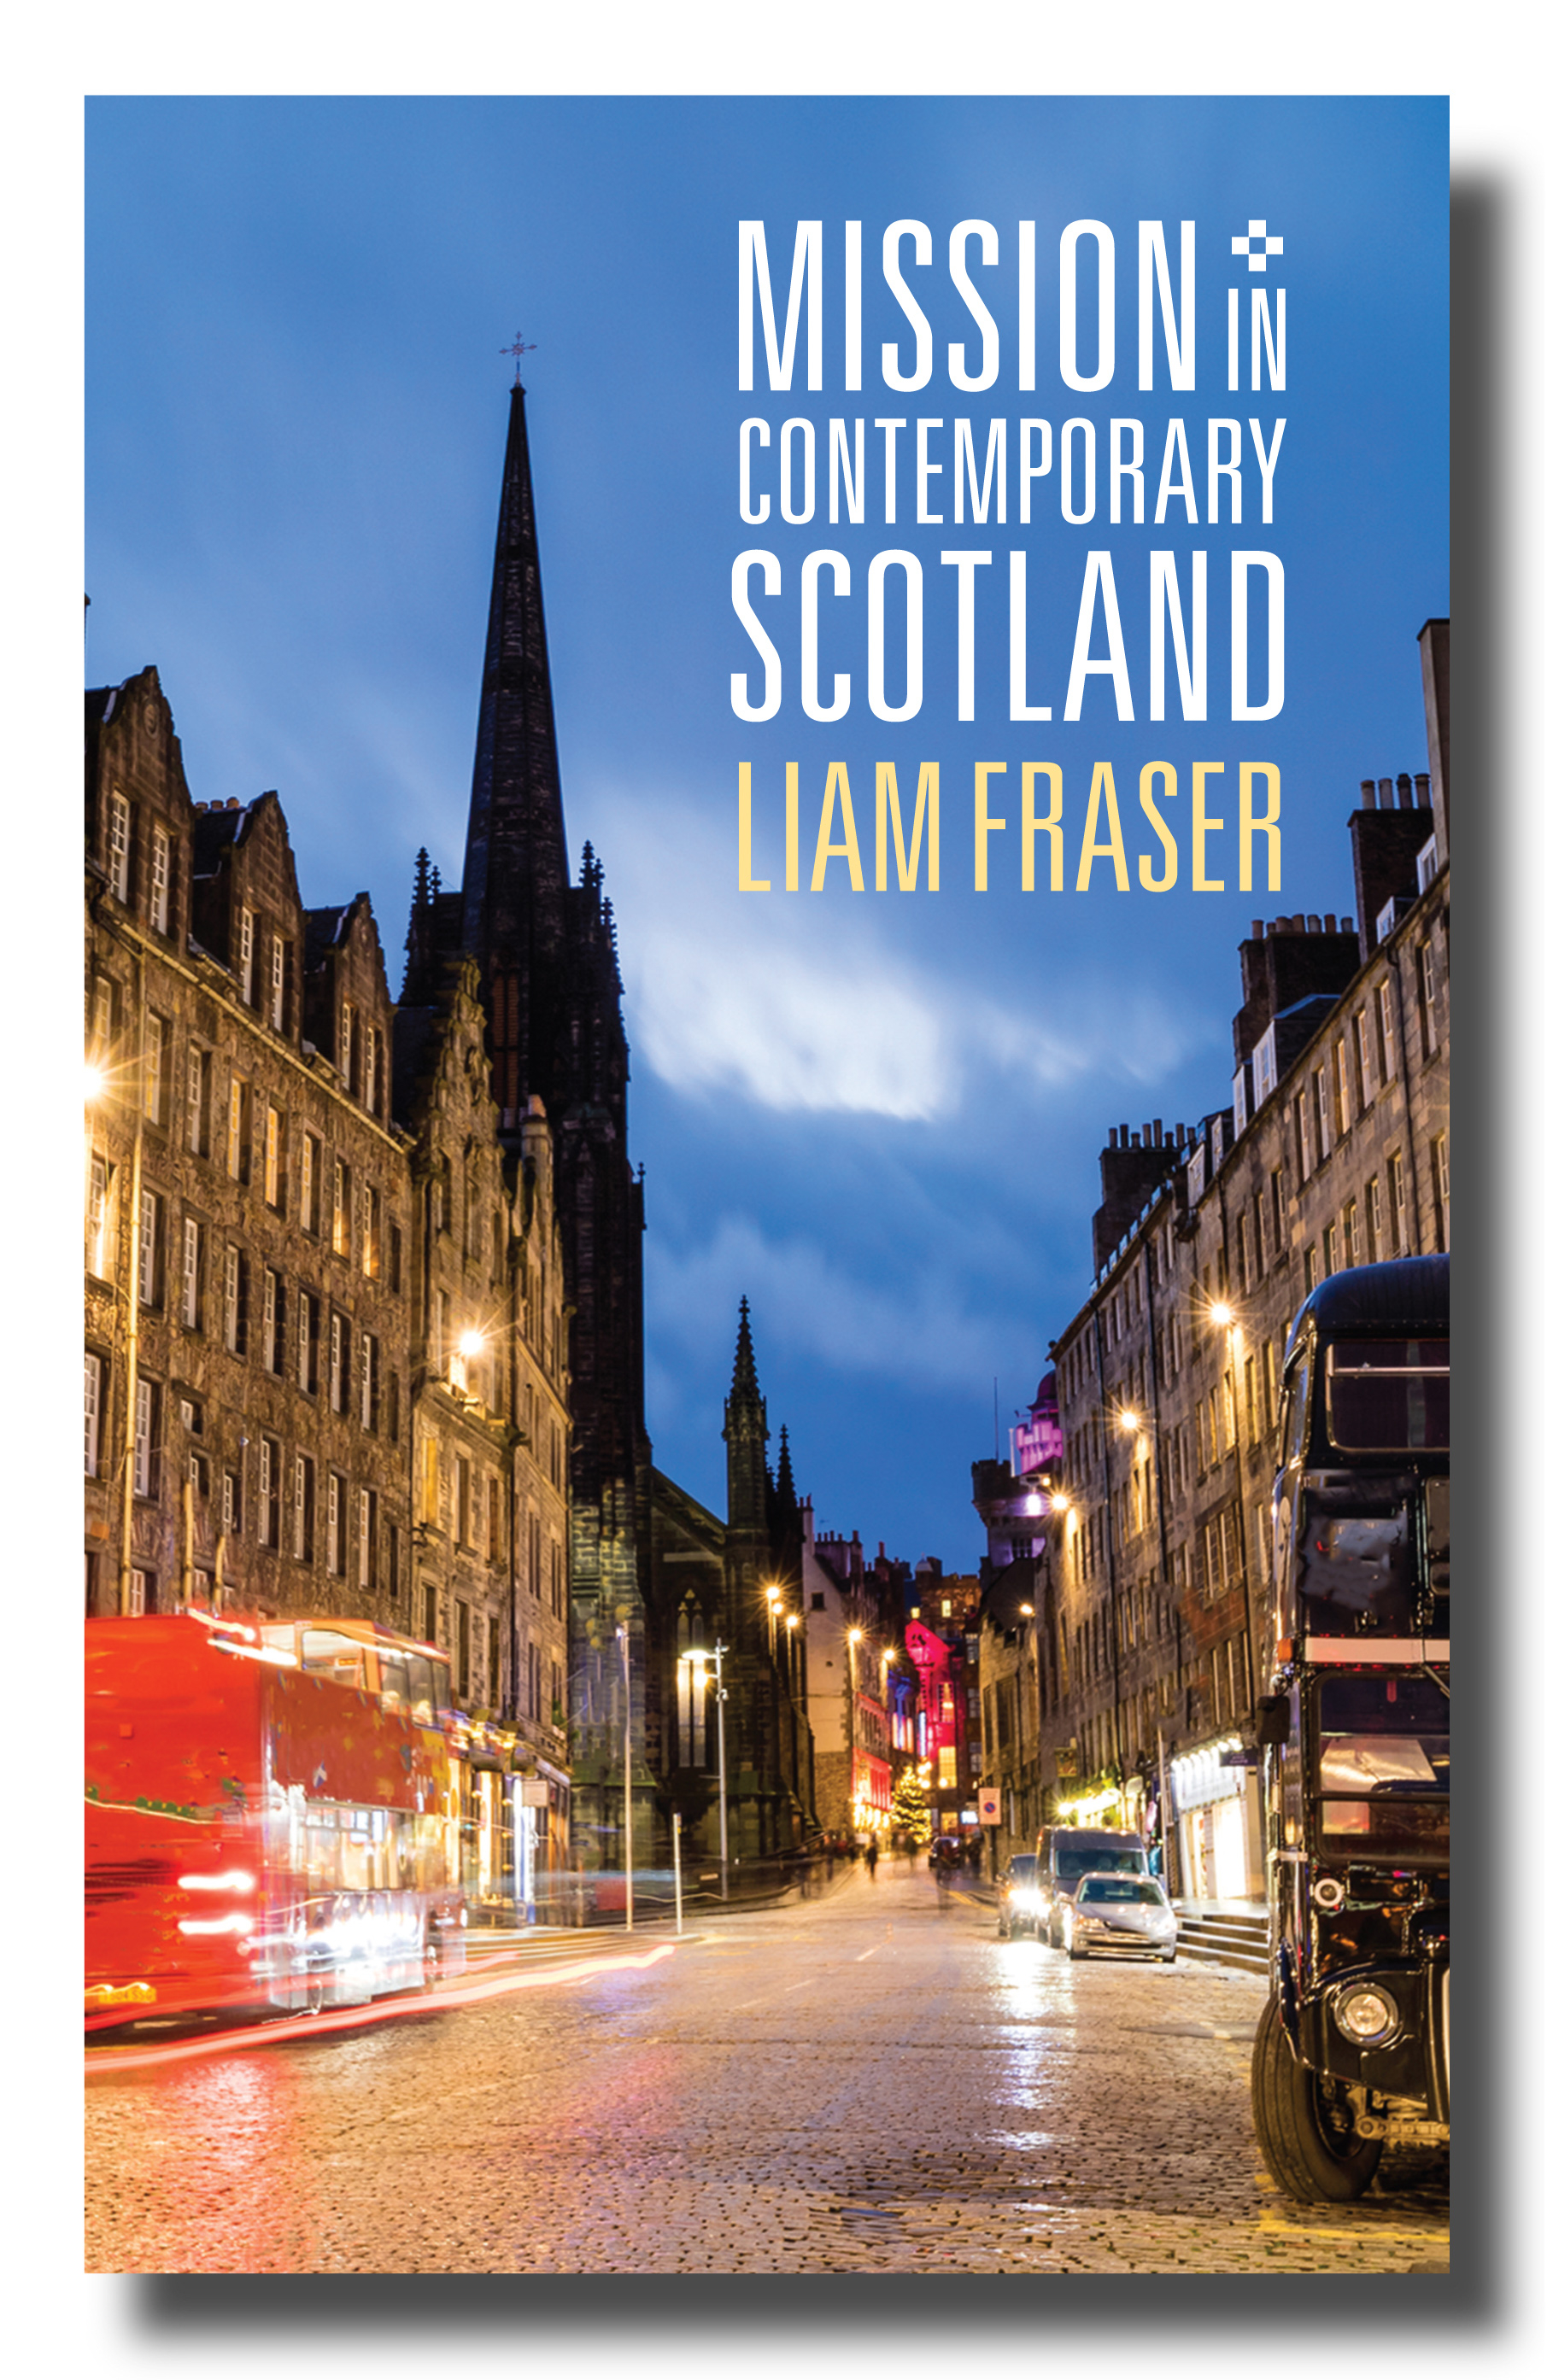 Mission in Contemporary Scotland By Liam Jerrold Fraser (Paperback)